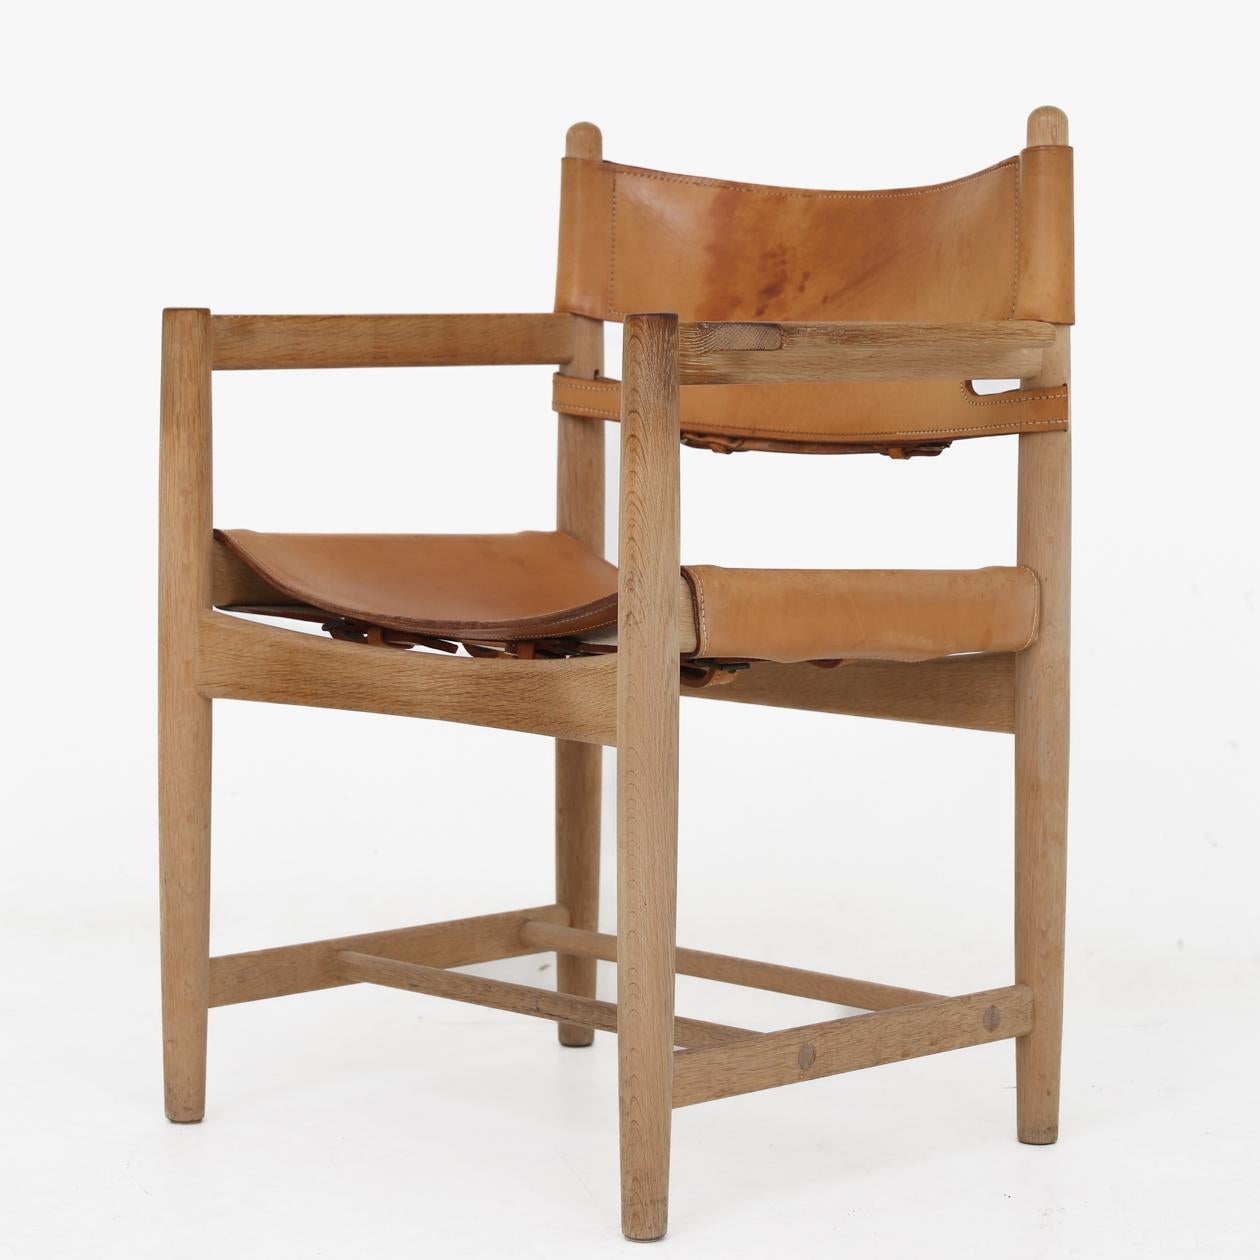 BM 3238 - set of 4 dining chairs (hunting chairs) in solid oak with armrests and patinated leather. Børge Mogensen / Fredericia Furniture.